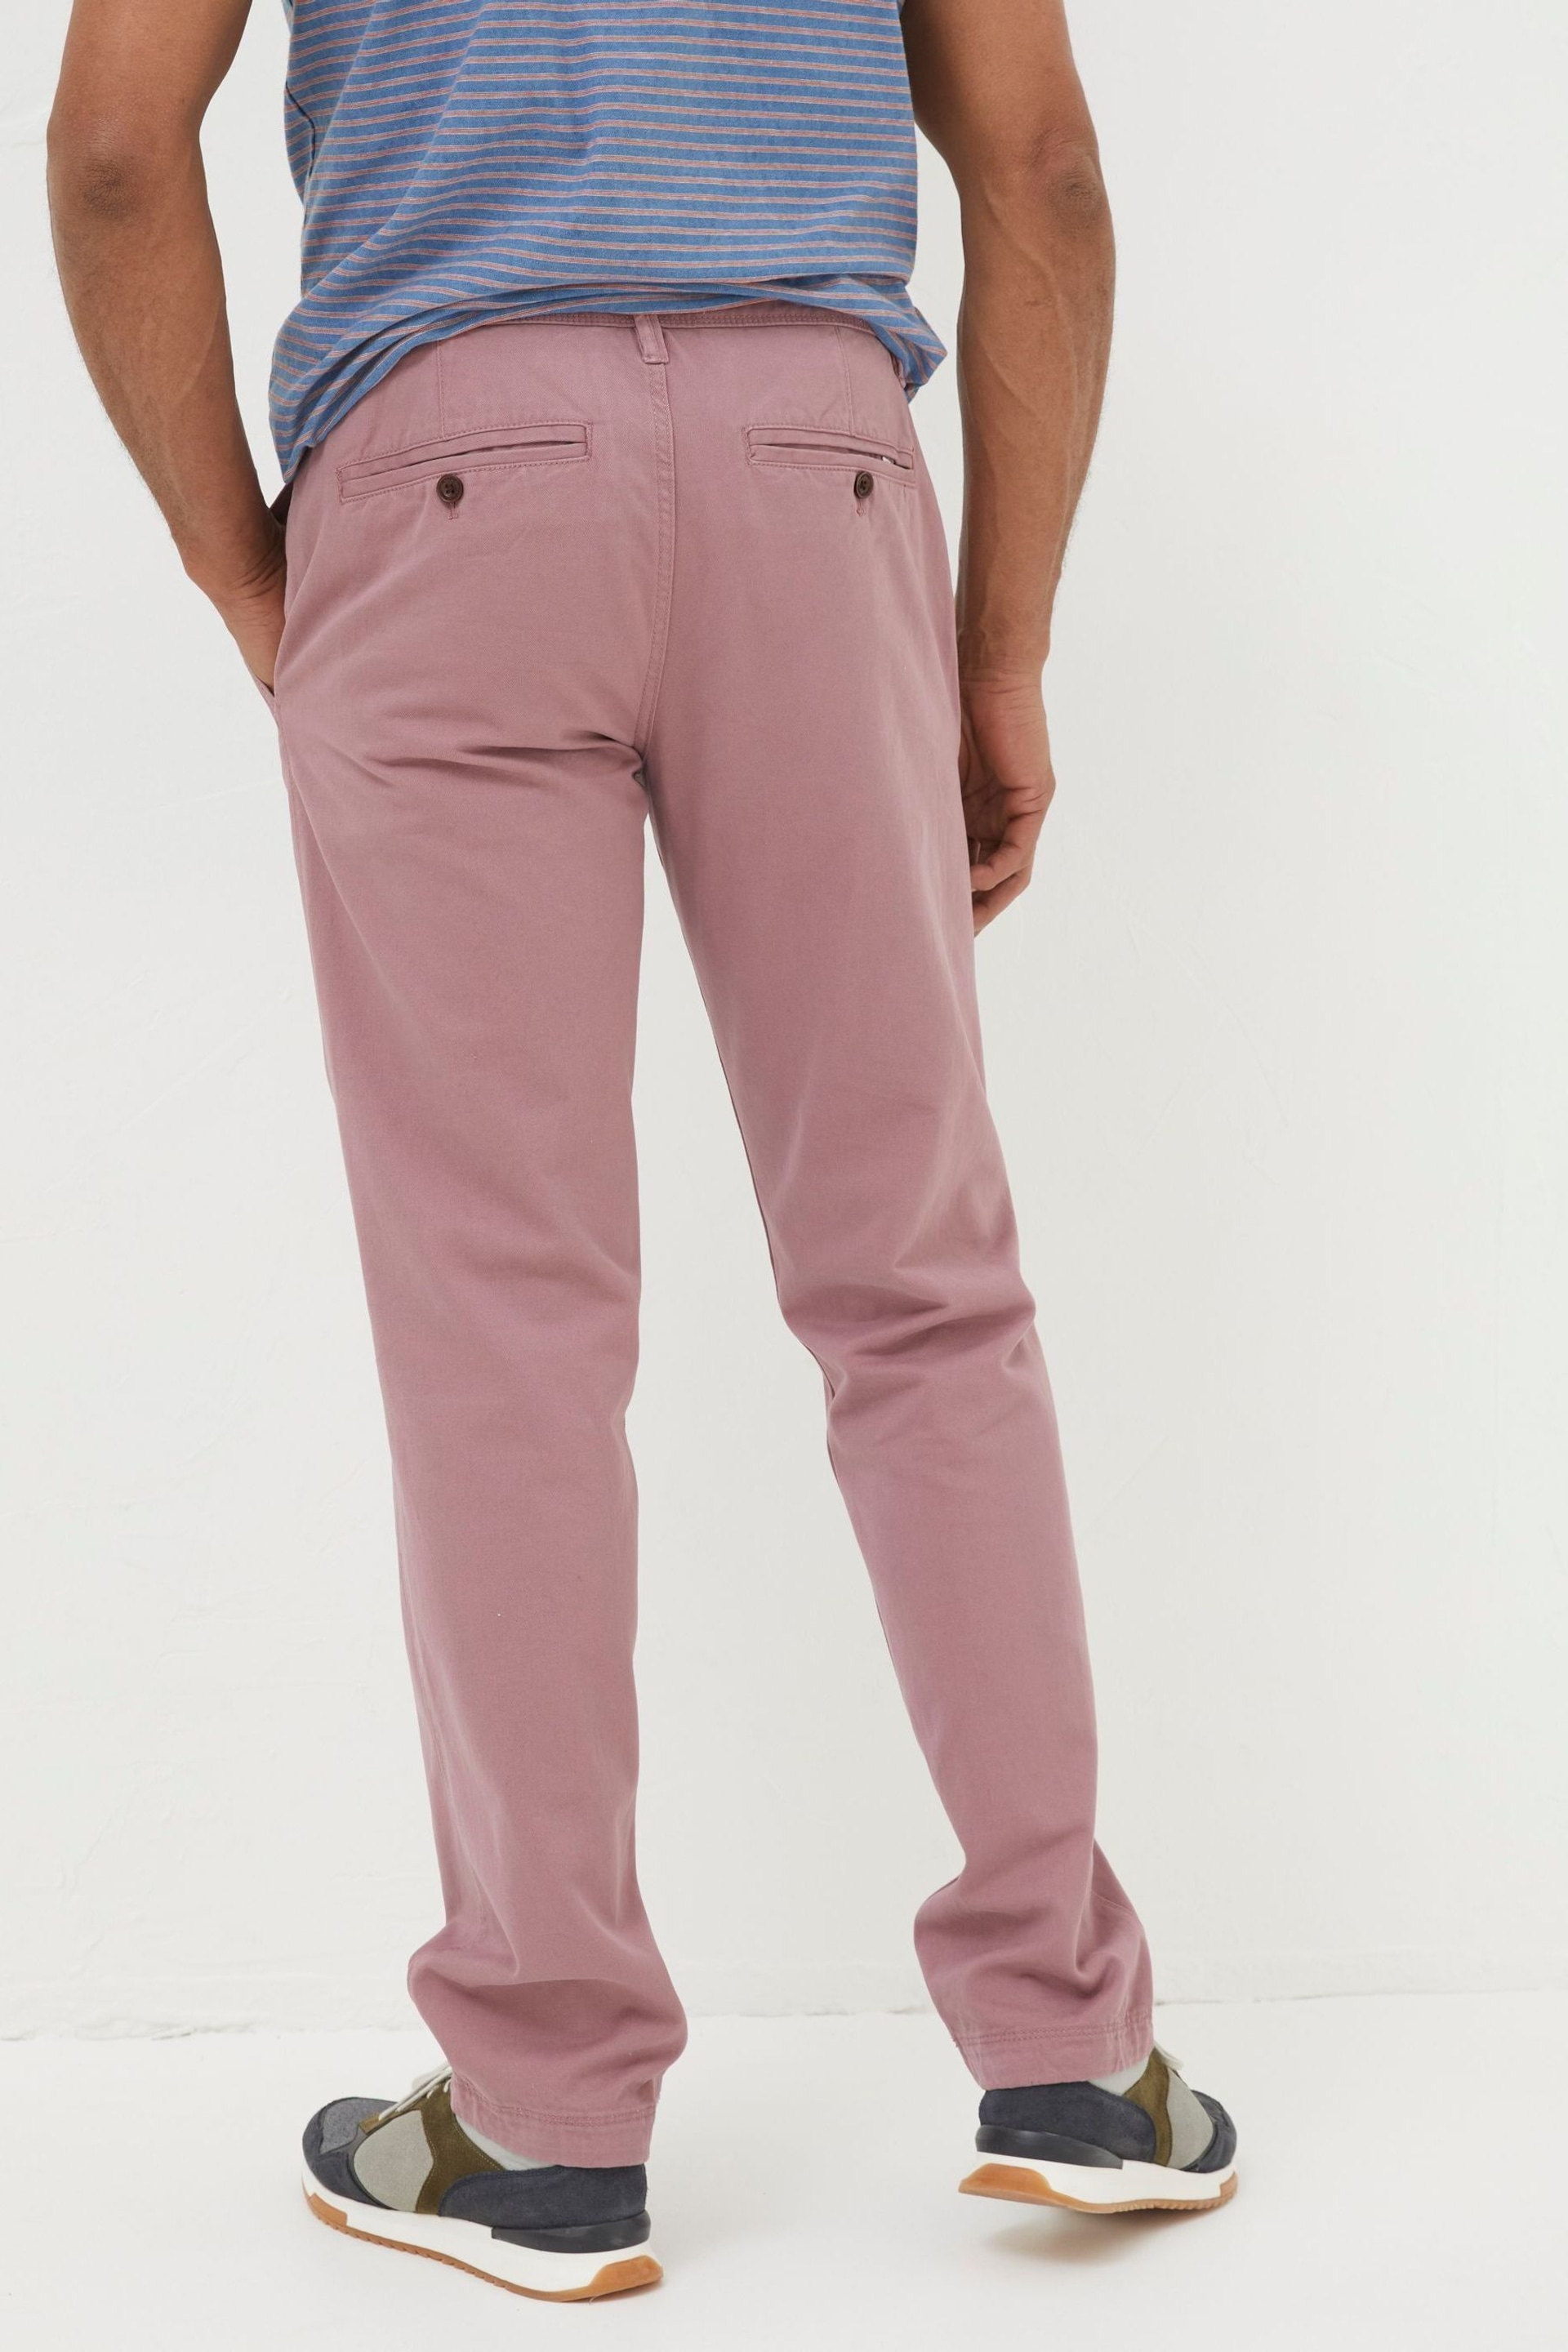 FatFace Pink Modern Coastal Chinos Trousers - Image 2 of 5